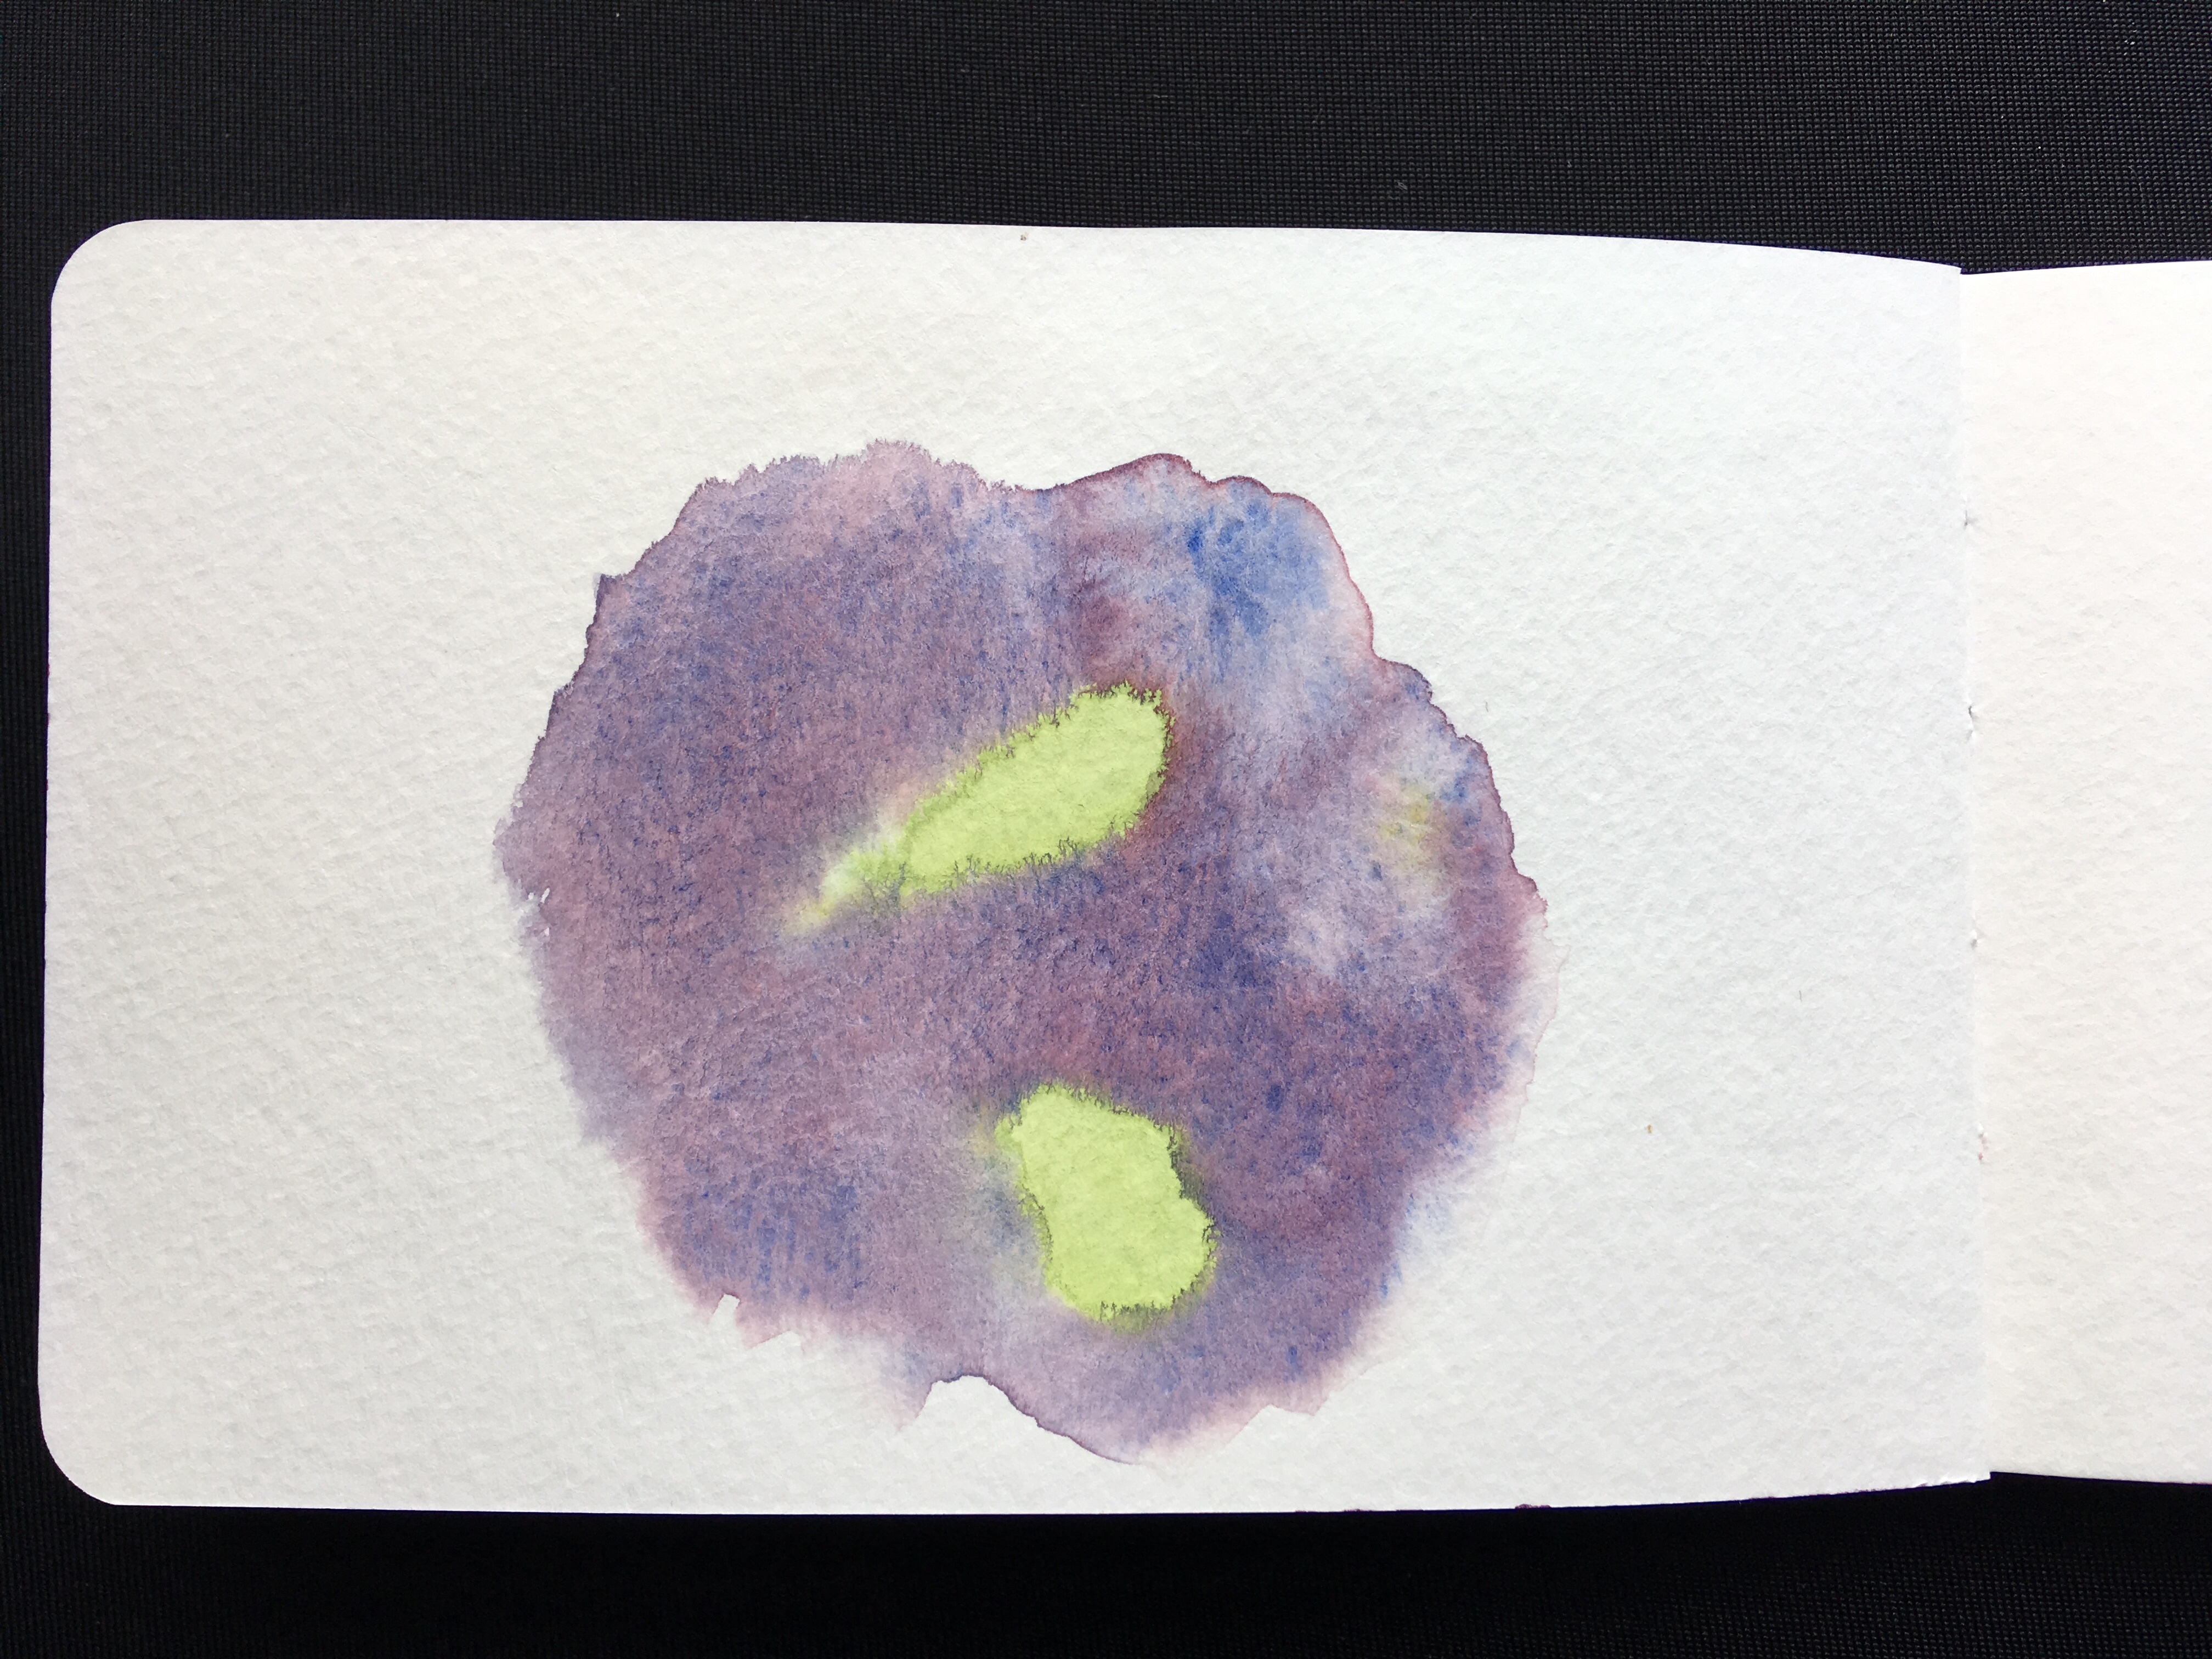 A bad watercolour painting of some kind of nebulous, abstract, green and purple thing